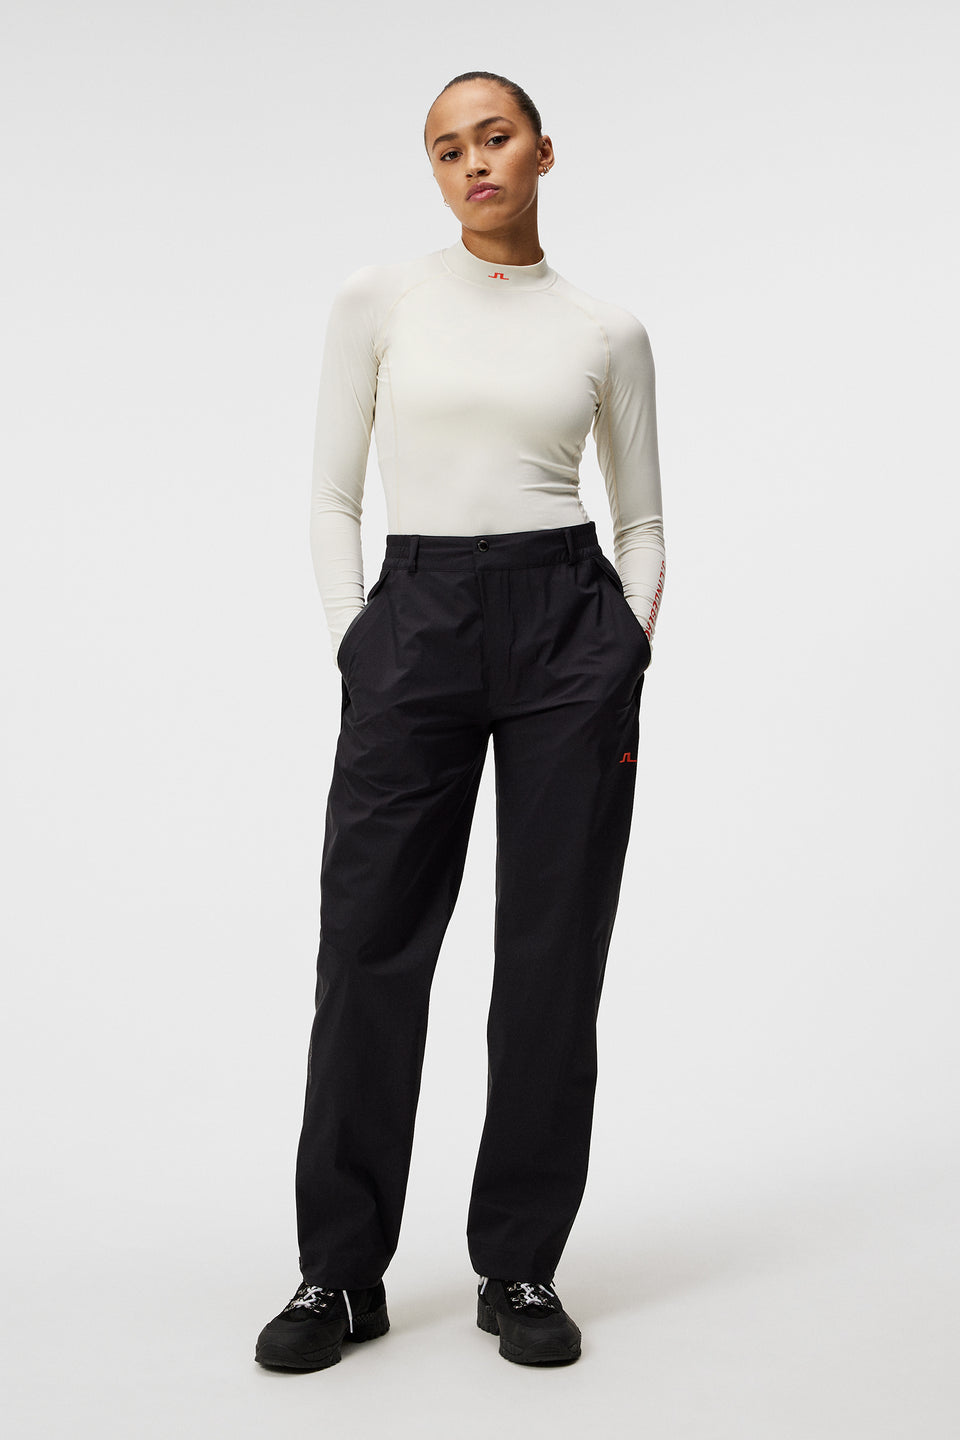 Practical Women's Athleisure Trousers - J.Lindeberg